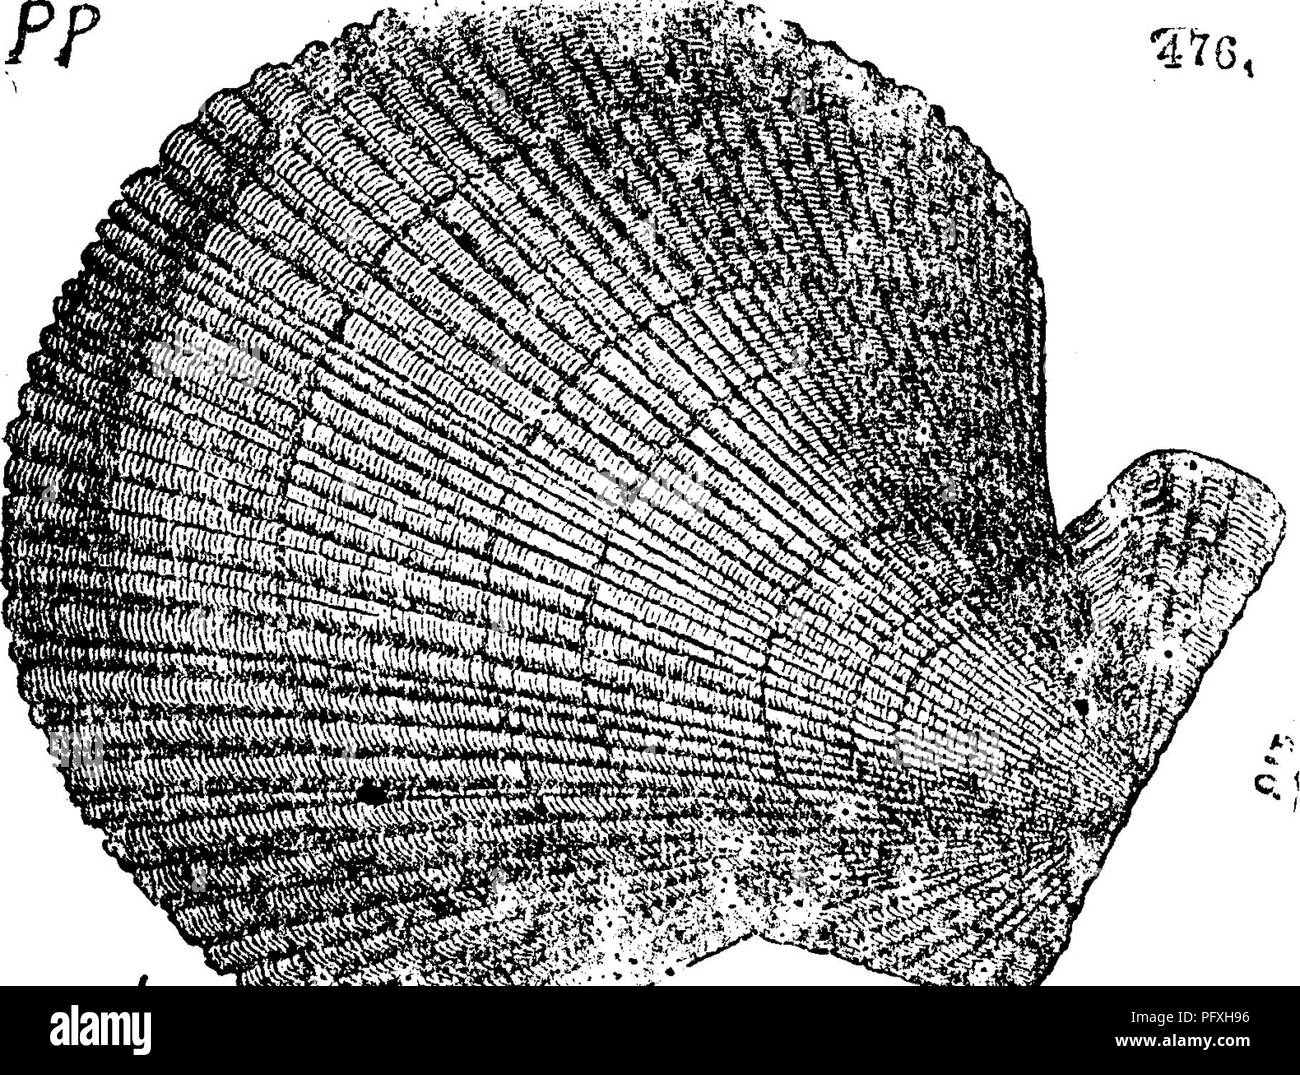 . A dictionary of the fossils of Pennsylvania and neighboring states named in the reports and catalogues of the survey ... Paleontology. 613 Fecop. Pecopteris ? A beautiful fruiting fern of this genus crowds Oook (Falton) roof shales of Ocean mine tunnel, Broad Top, Huntingdon Co. T3, dld,—XIIL Pecten aviculatus. See Entolium aviculatum. XIIL Pecten Iroadheadi. See Aviculopecten carboniferus. Pecten carloniferus. See Avteulopecten carboniferus. Pecten hawni. See Aviculopecten carboniferus. XIIL Pecten islandicus, Muller. Geology of Canada, 1863, page 963, fig. 476 ; one of the Arctic shells le Stock Photo